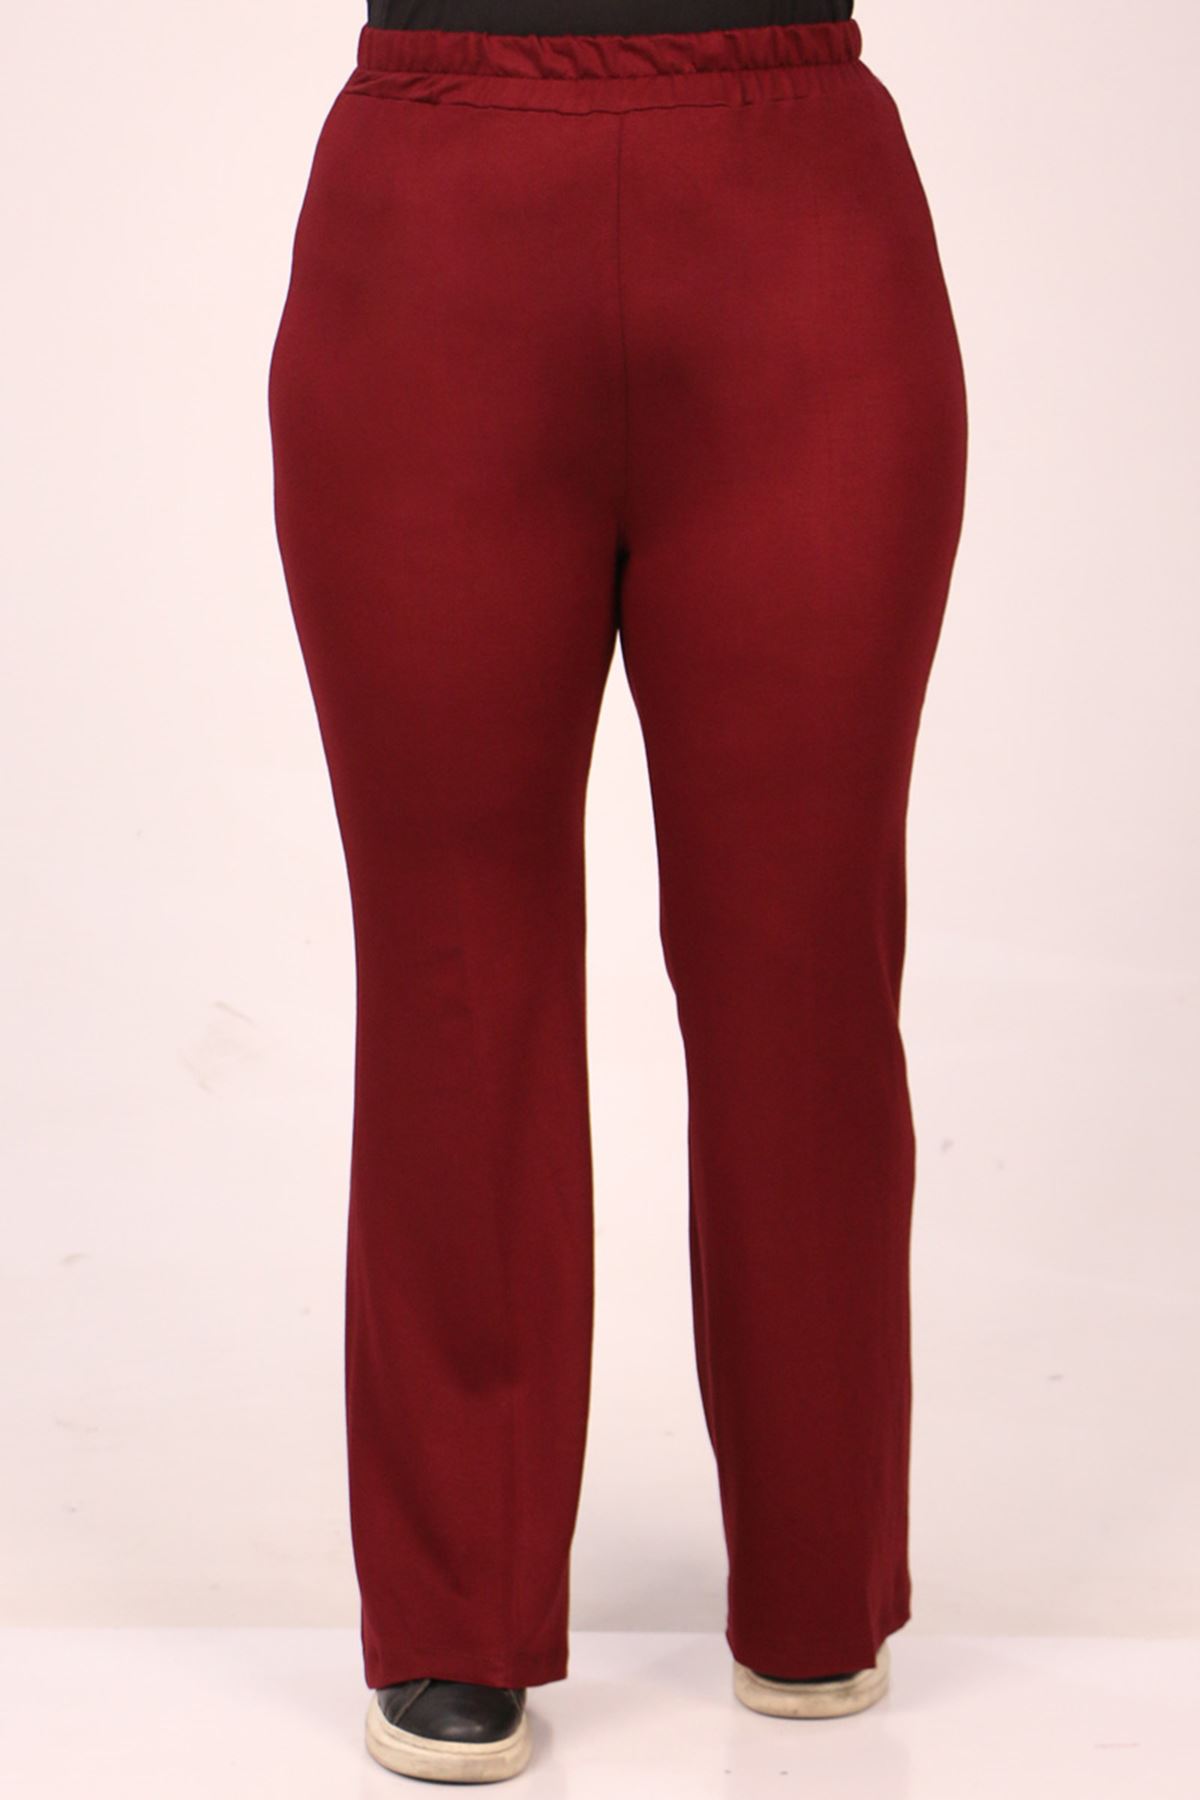 39506 Plus Size Flare Leg Two Threads Crystal-Claret Red